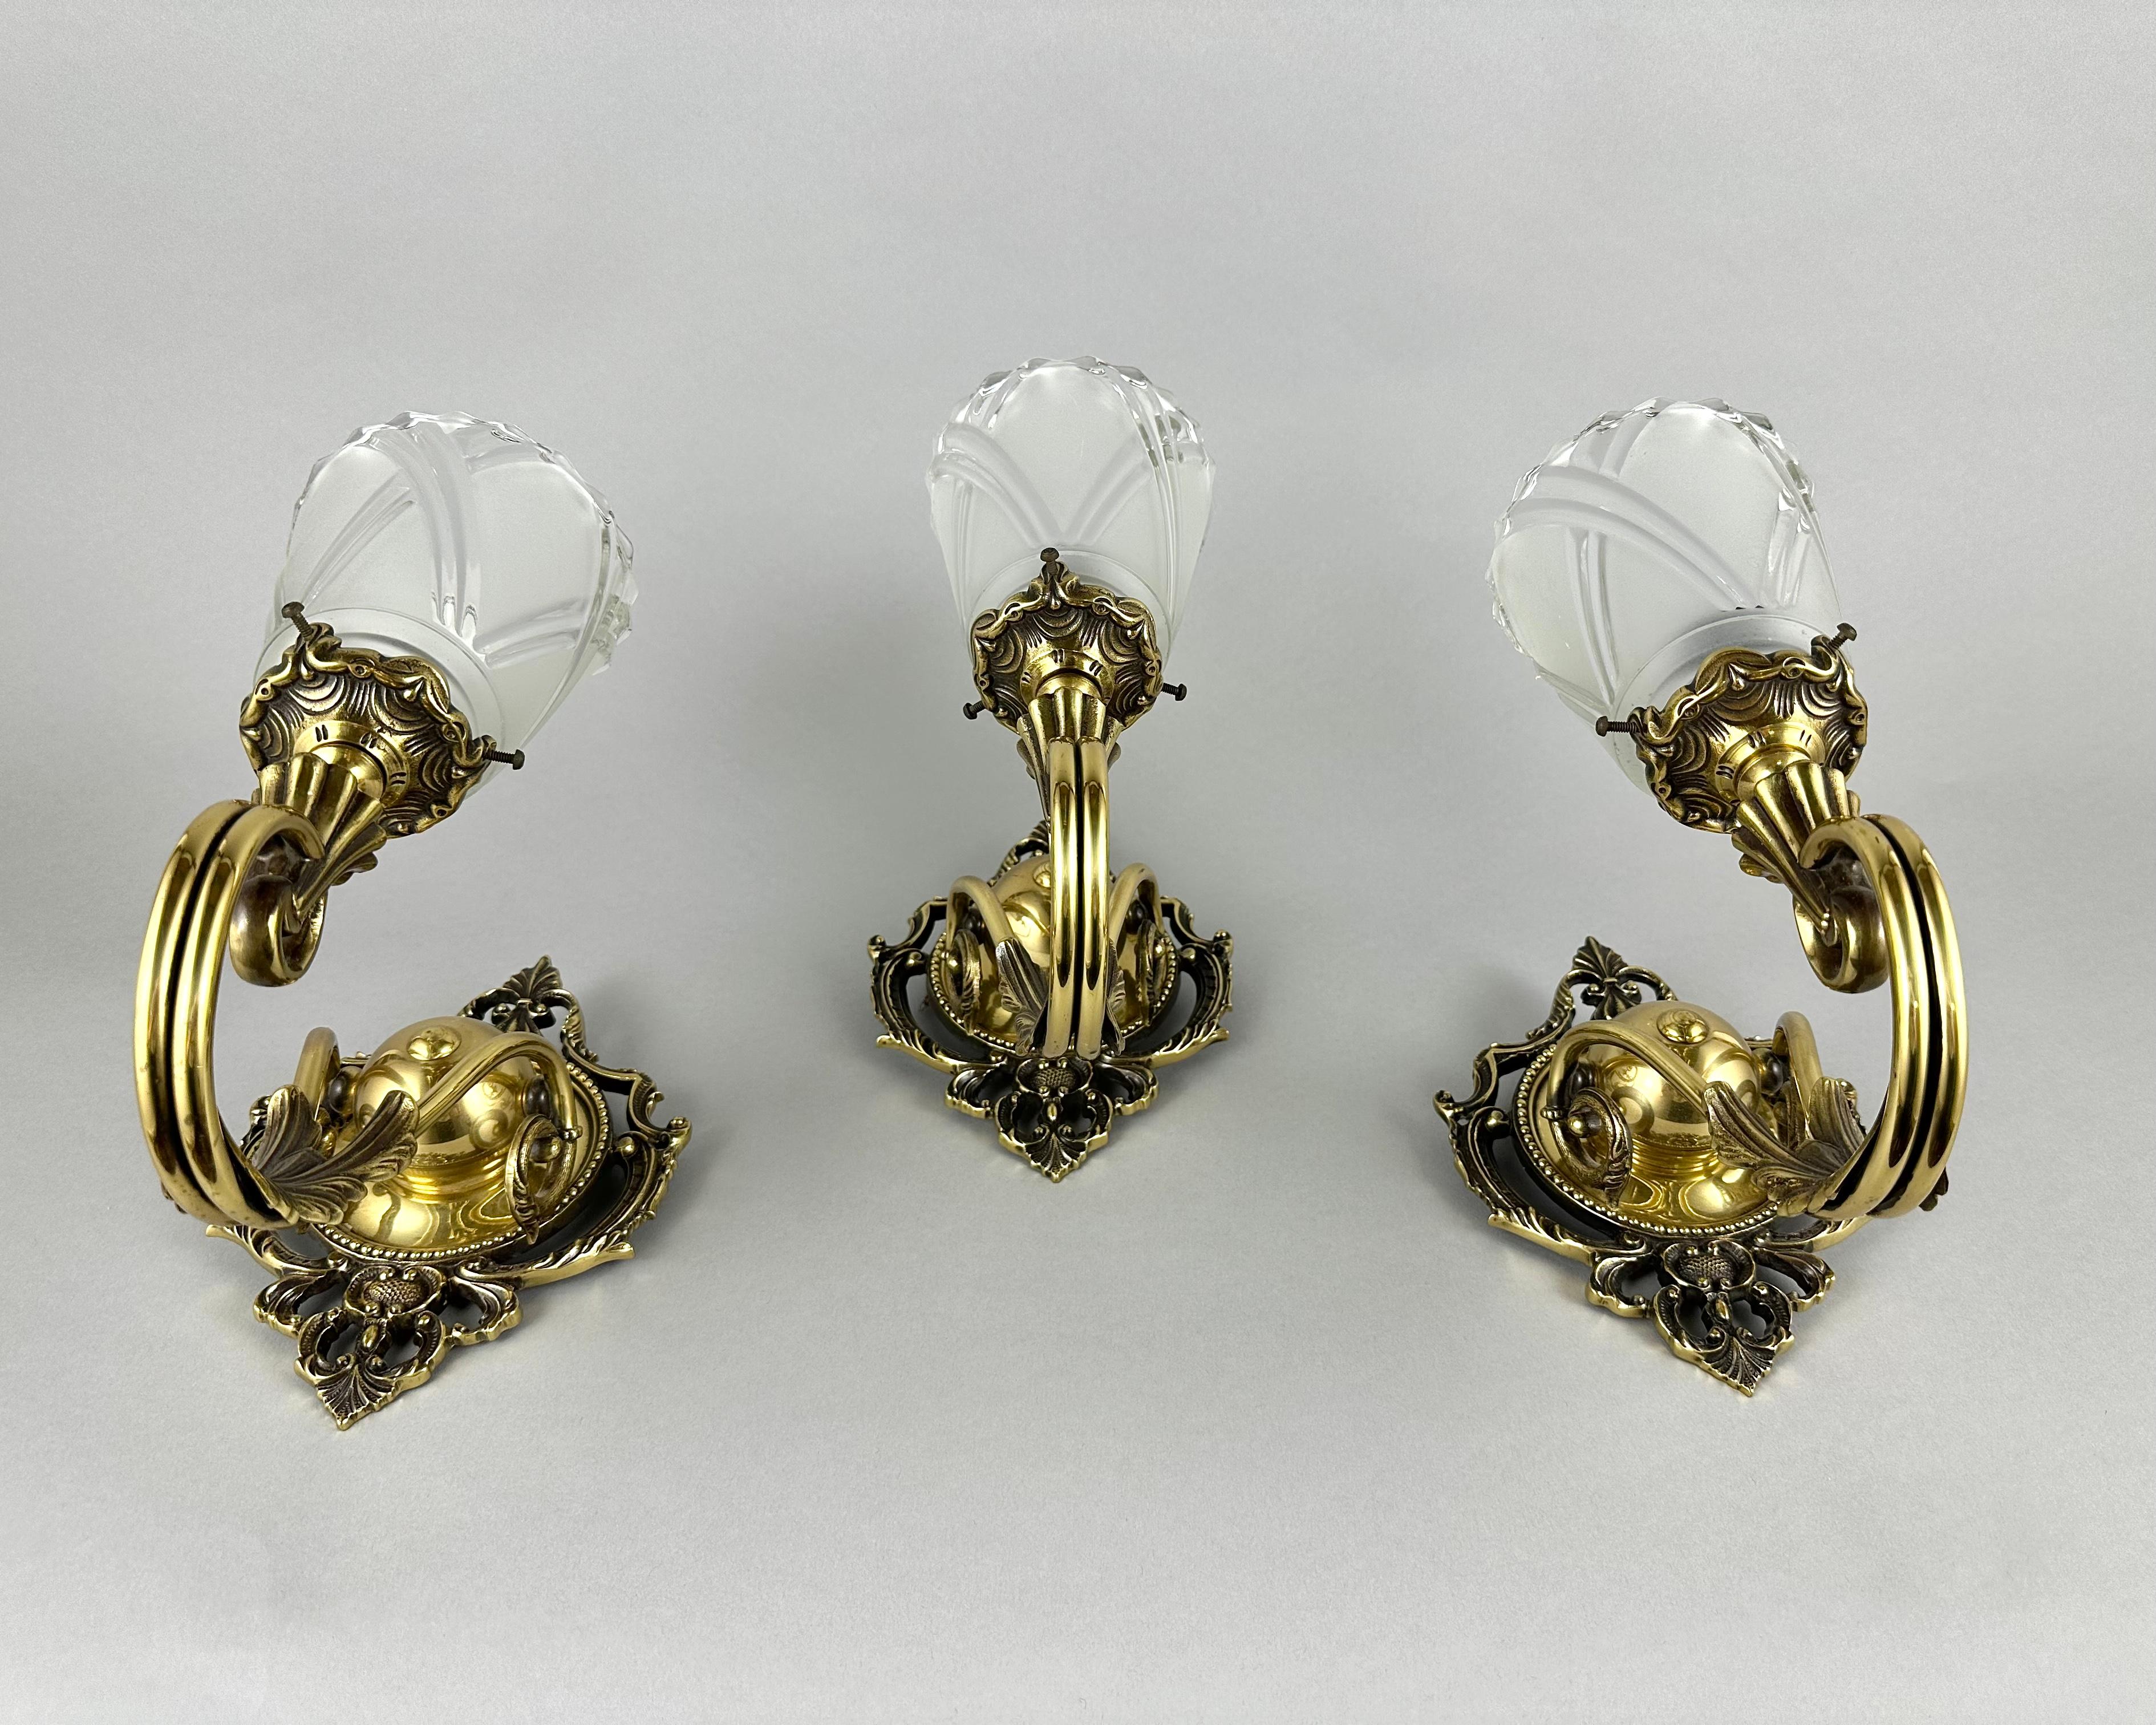 Vintage Set 3 Wall Mount Sconces In Bronze With Glass Shades, Germany In Excellent Condition For Sale In Bastogne, BE